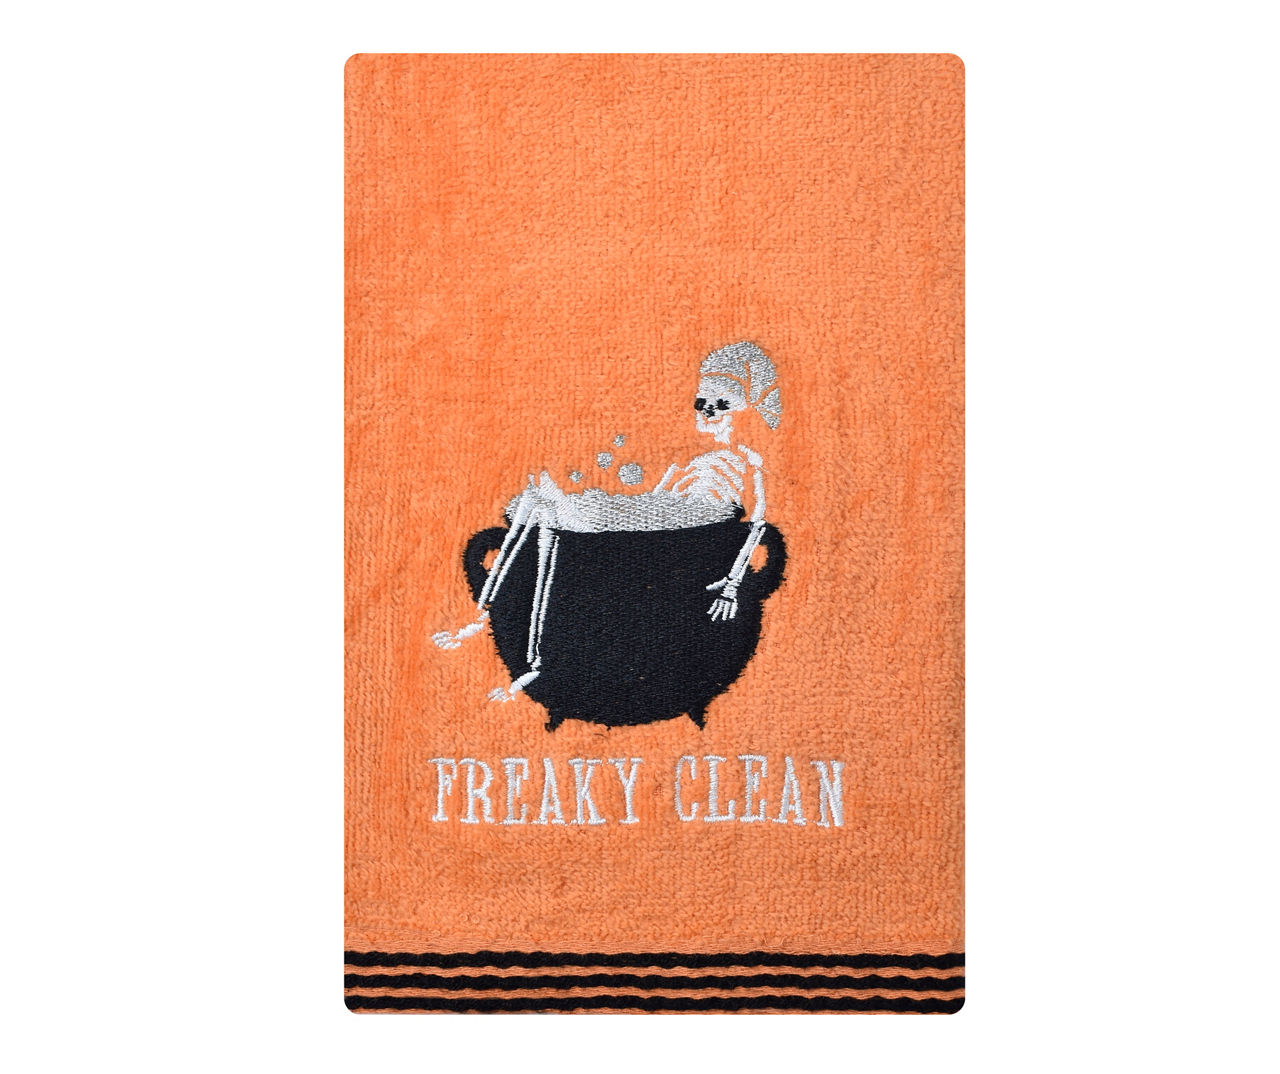 Halloween Orange Cotton Kitchen Towel with October 31 in Black Embroidery,  Halloween Haunting Horror Decor - Texas Hill Country Ceramics